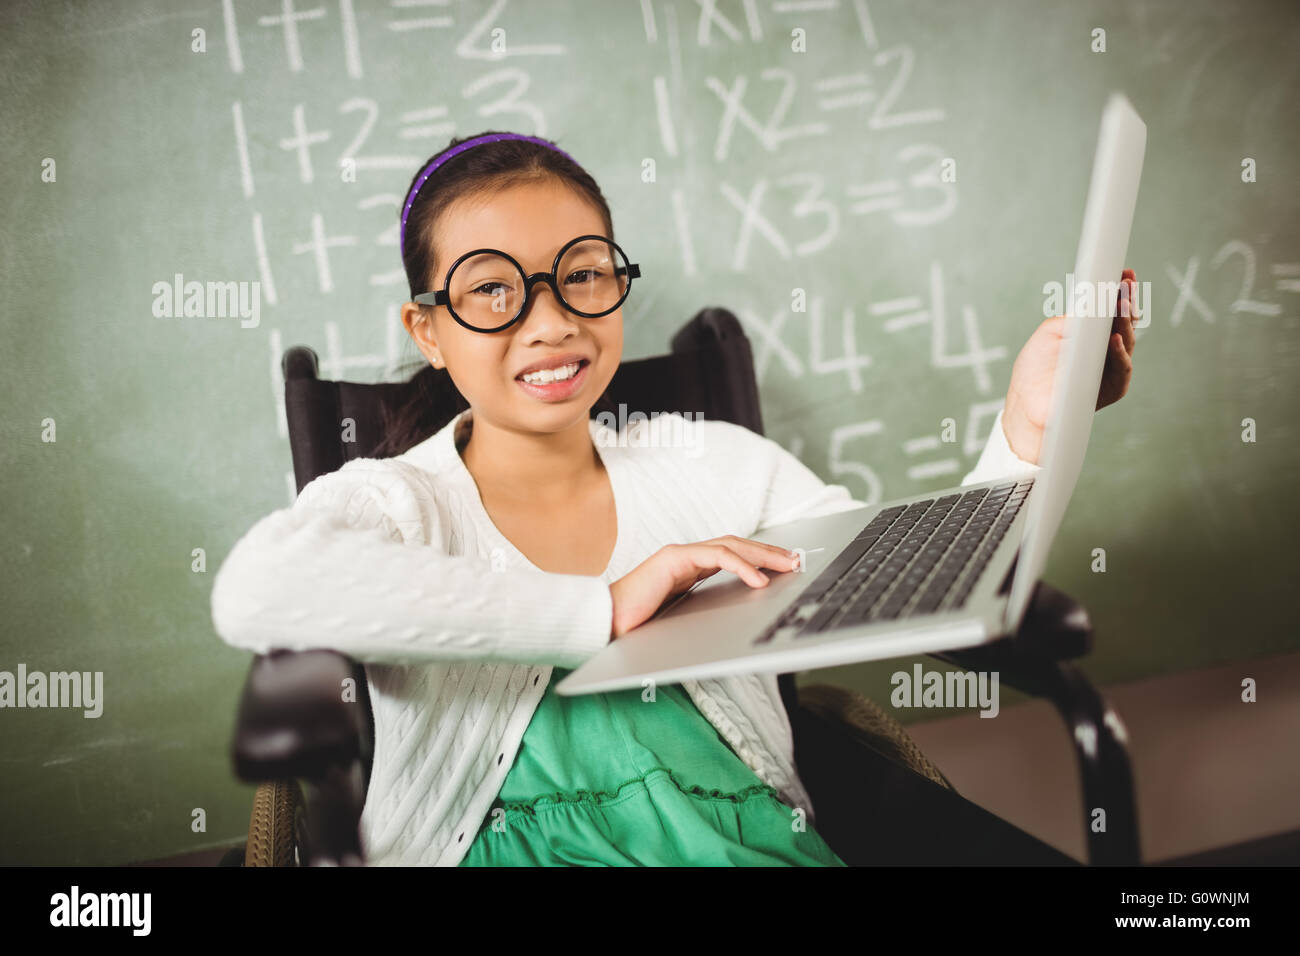 Cute girl with big glasses looking at the camera Stock Photo